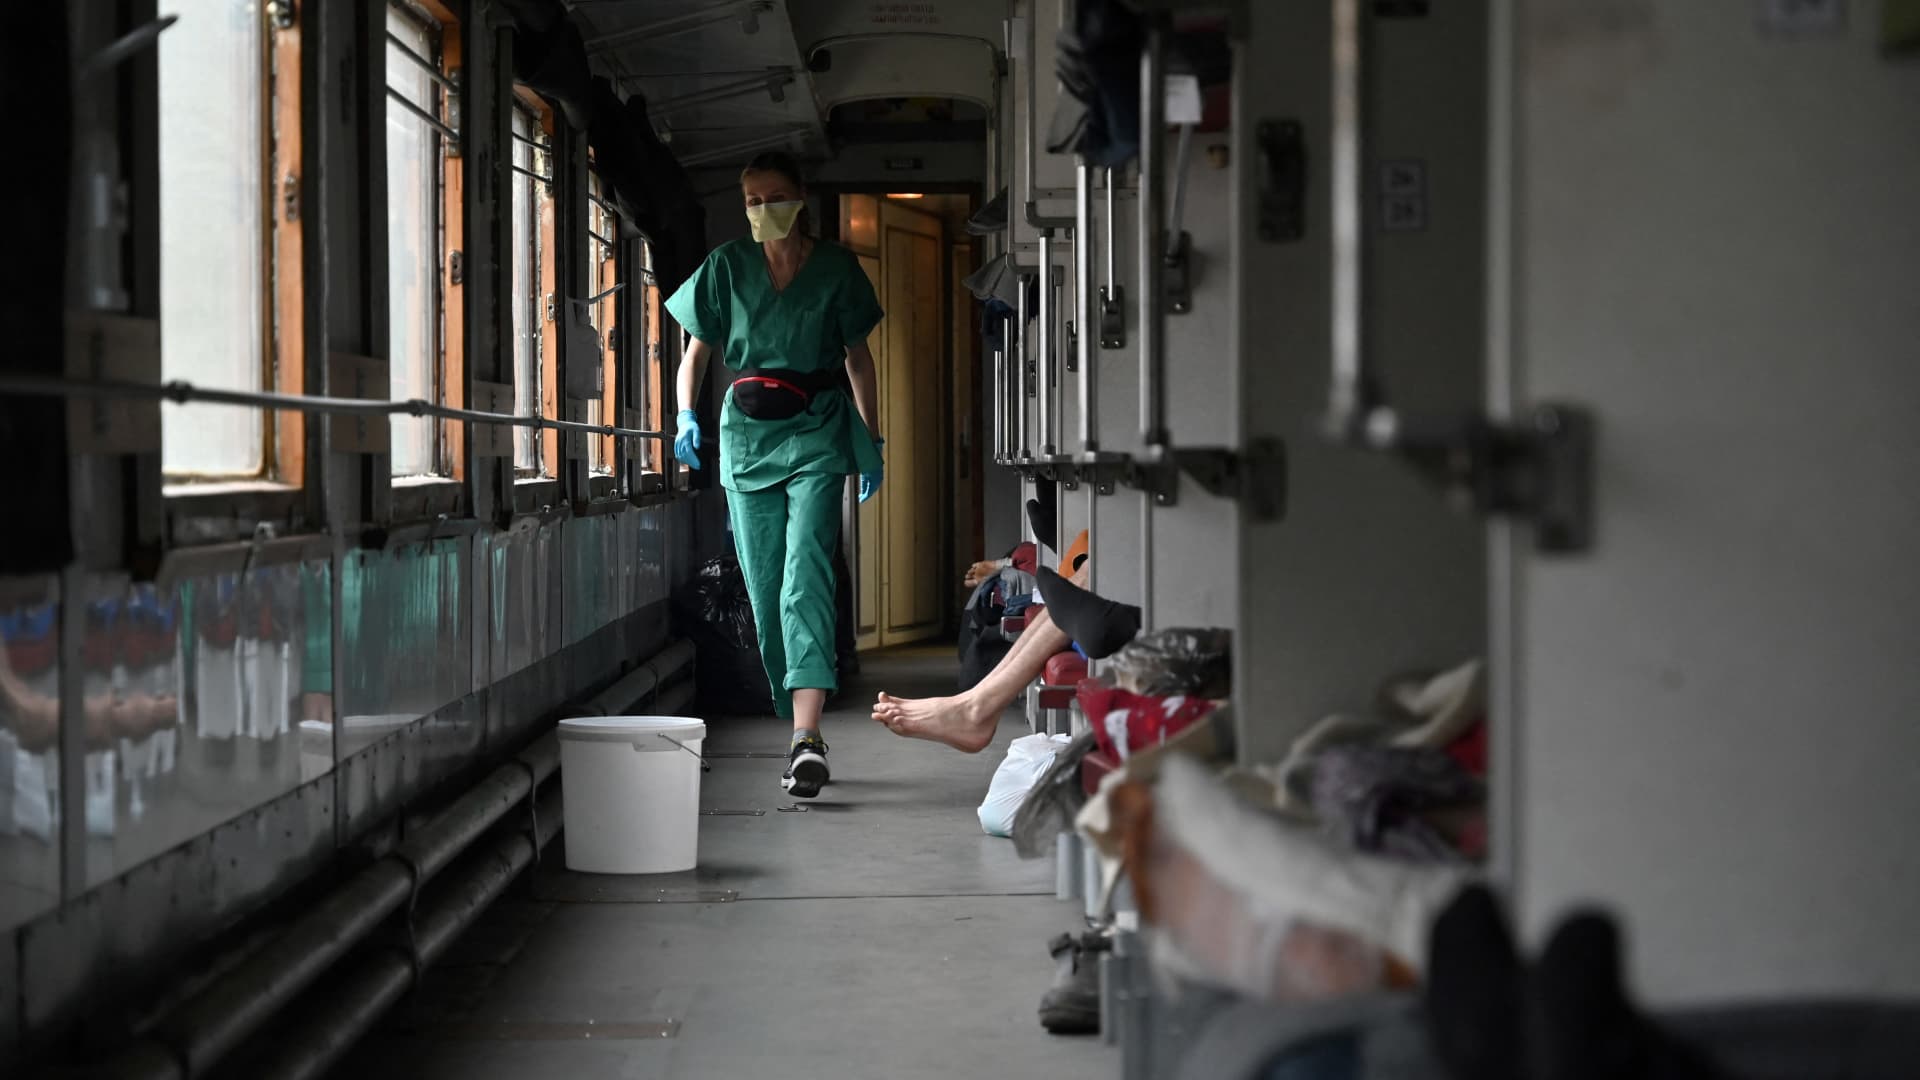 Elena, 33, a team member of Doctors Without Borders, cares for patients on a medical evacuation train on its way to the western Ukrainian city of Lviv on April 10, 2022.